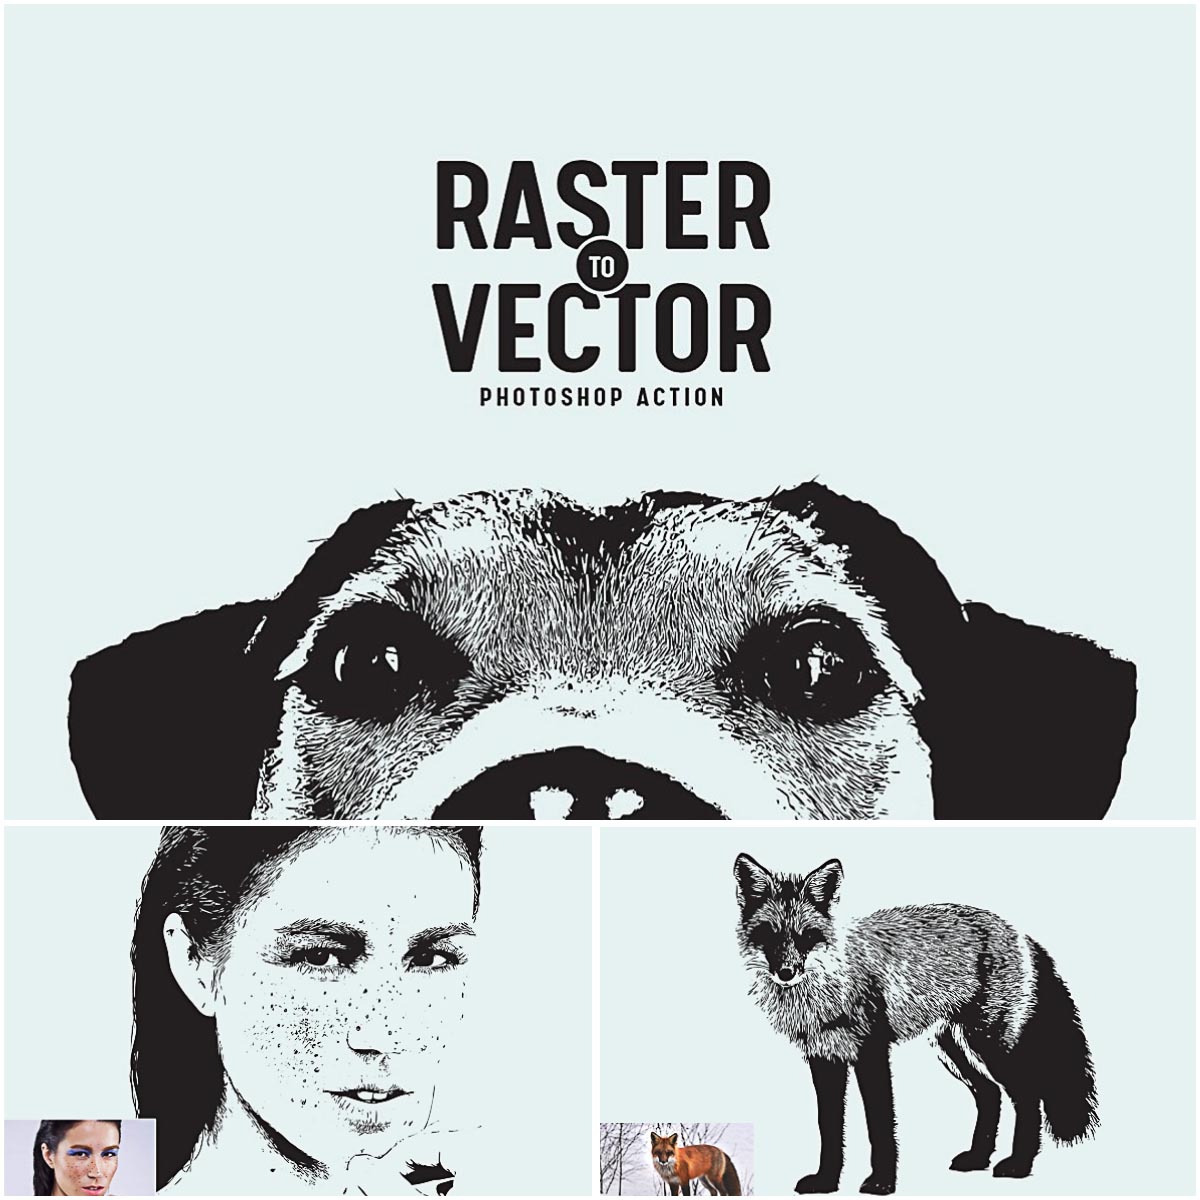 are photoshop images vector or raster based